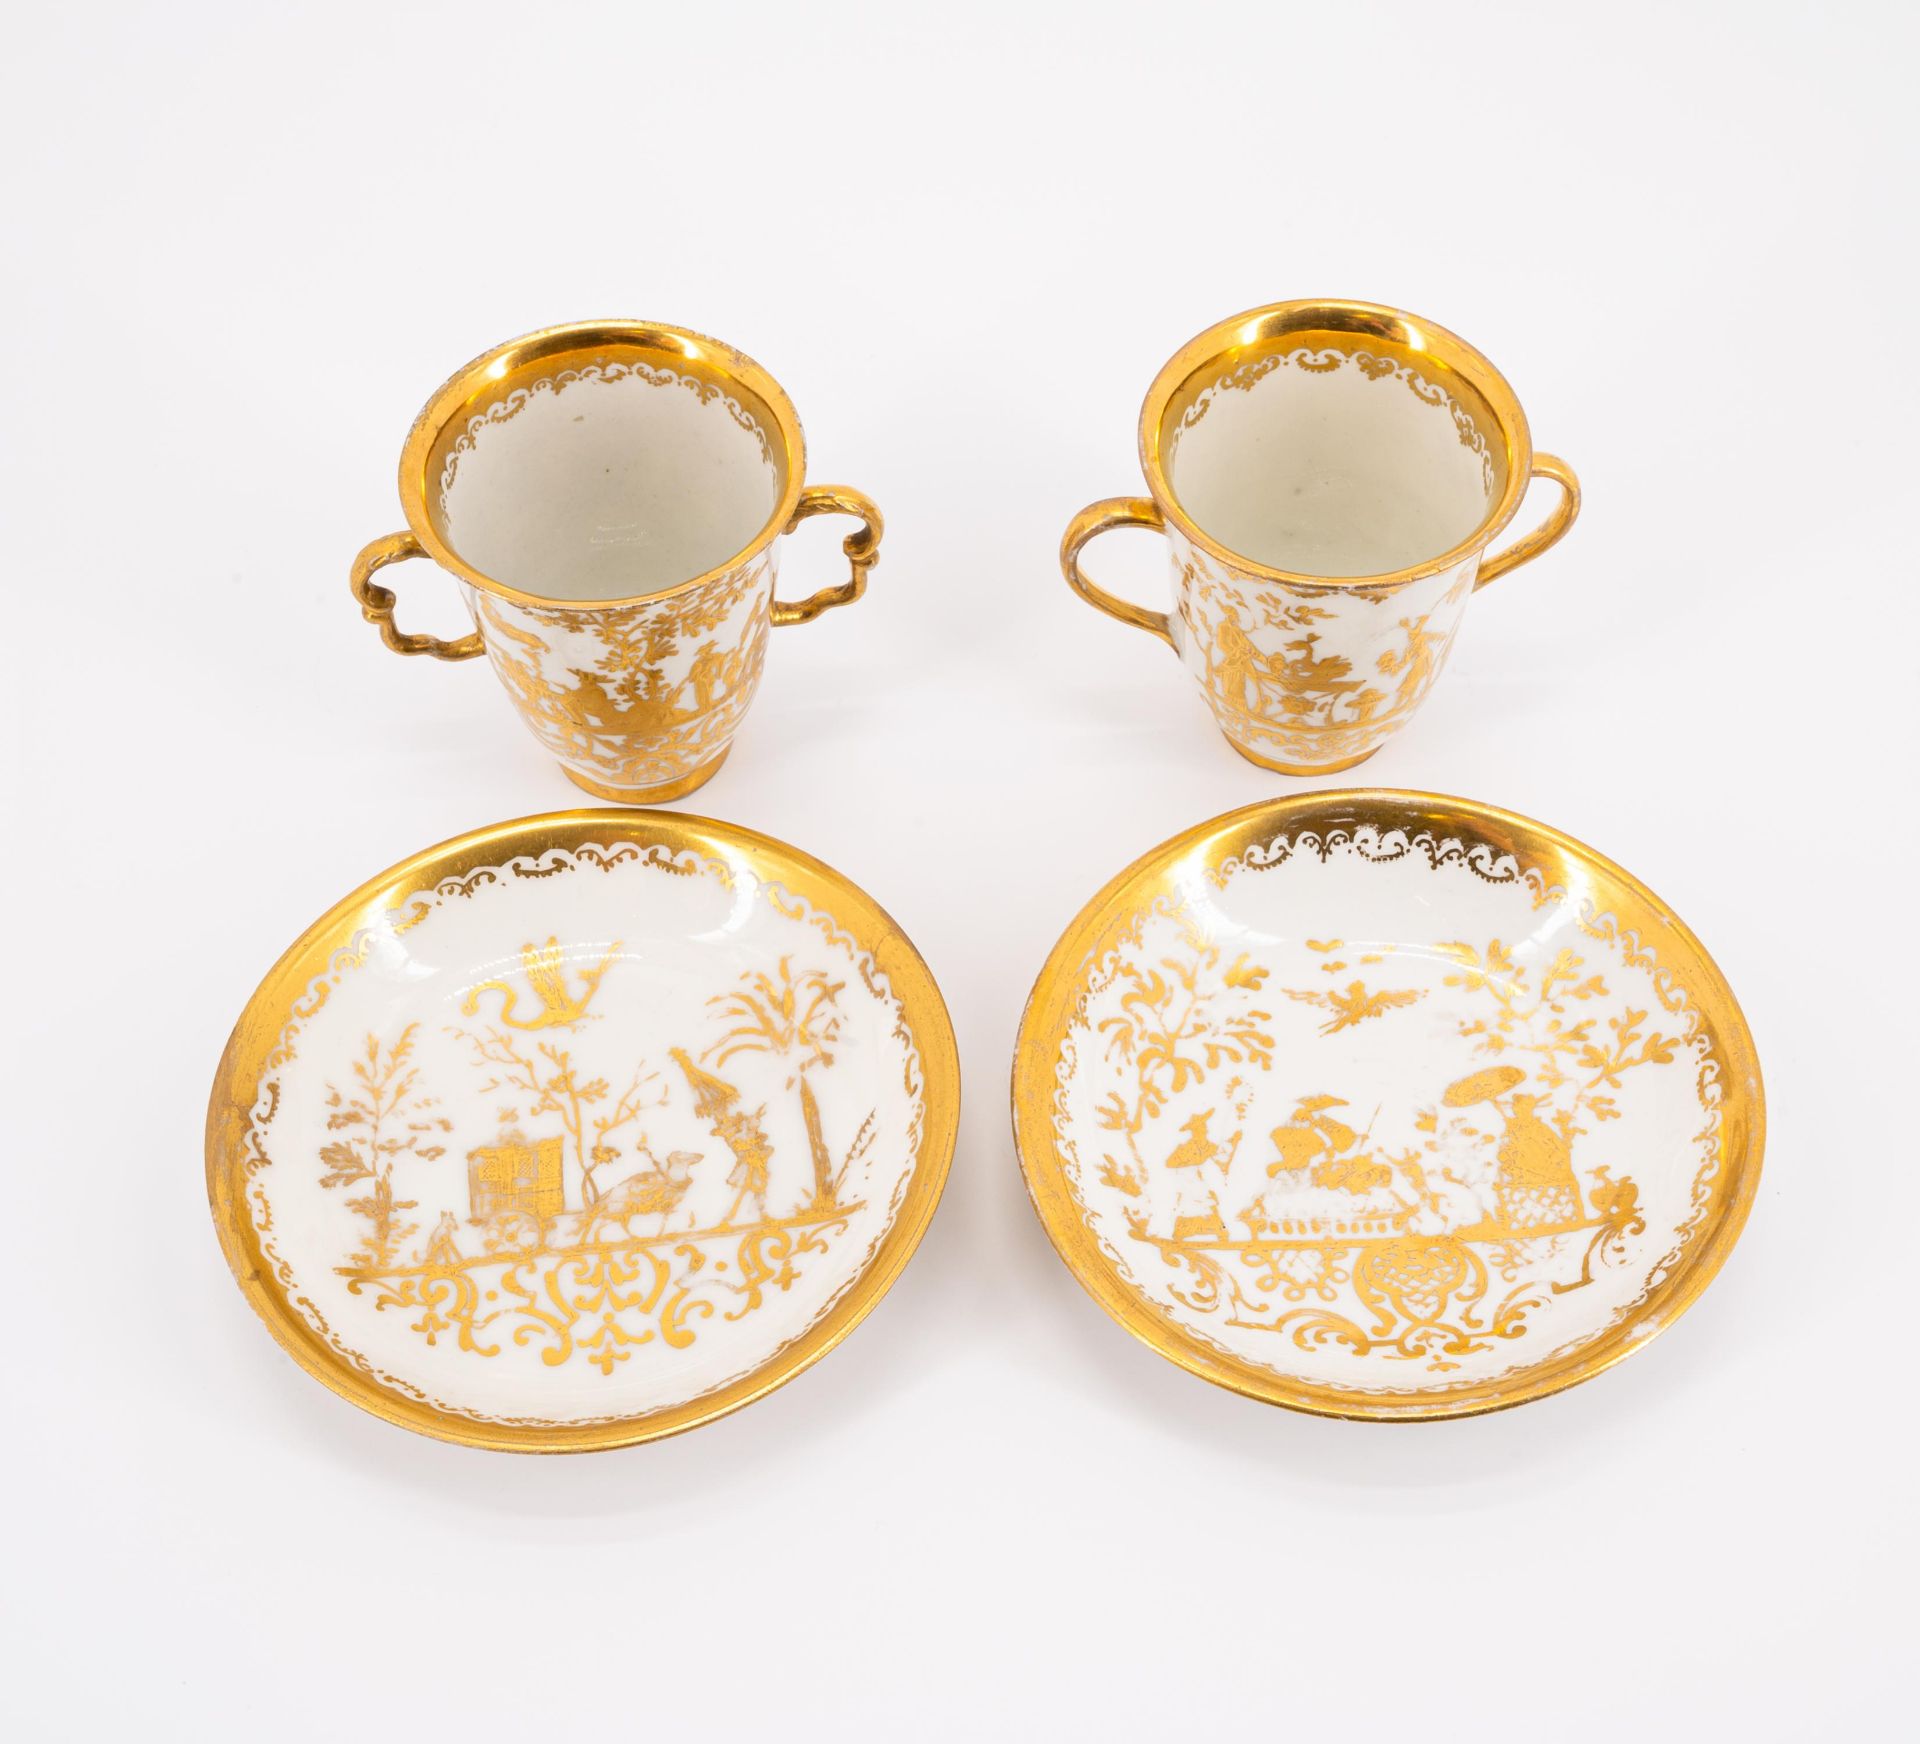 Meissen: TWO PORCELAIN BEAKERS WITH DOUBLE HANDLE AND SAUCERS WITH GOLDEN CHINOISERIES - Image 5 of 6